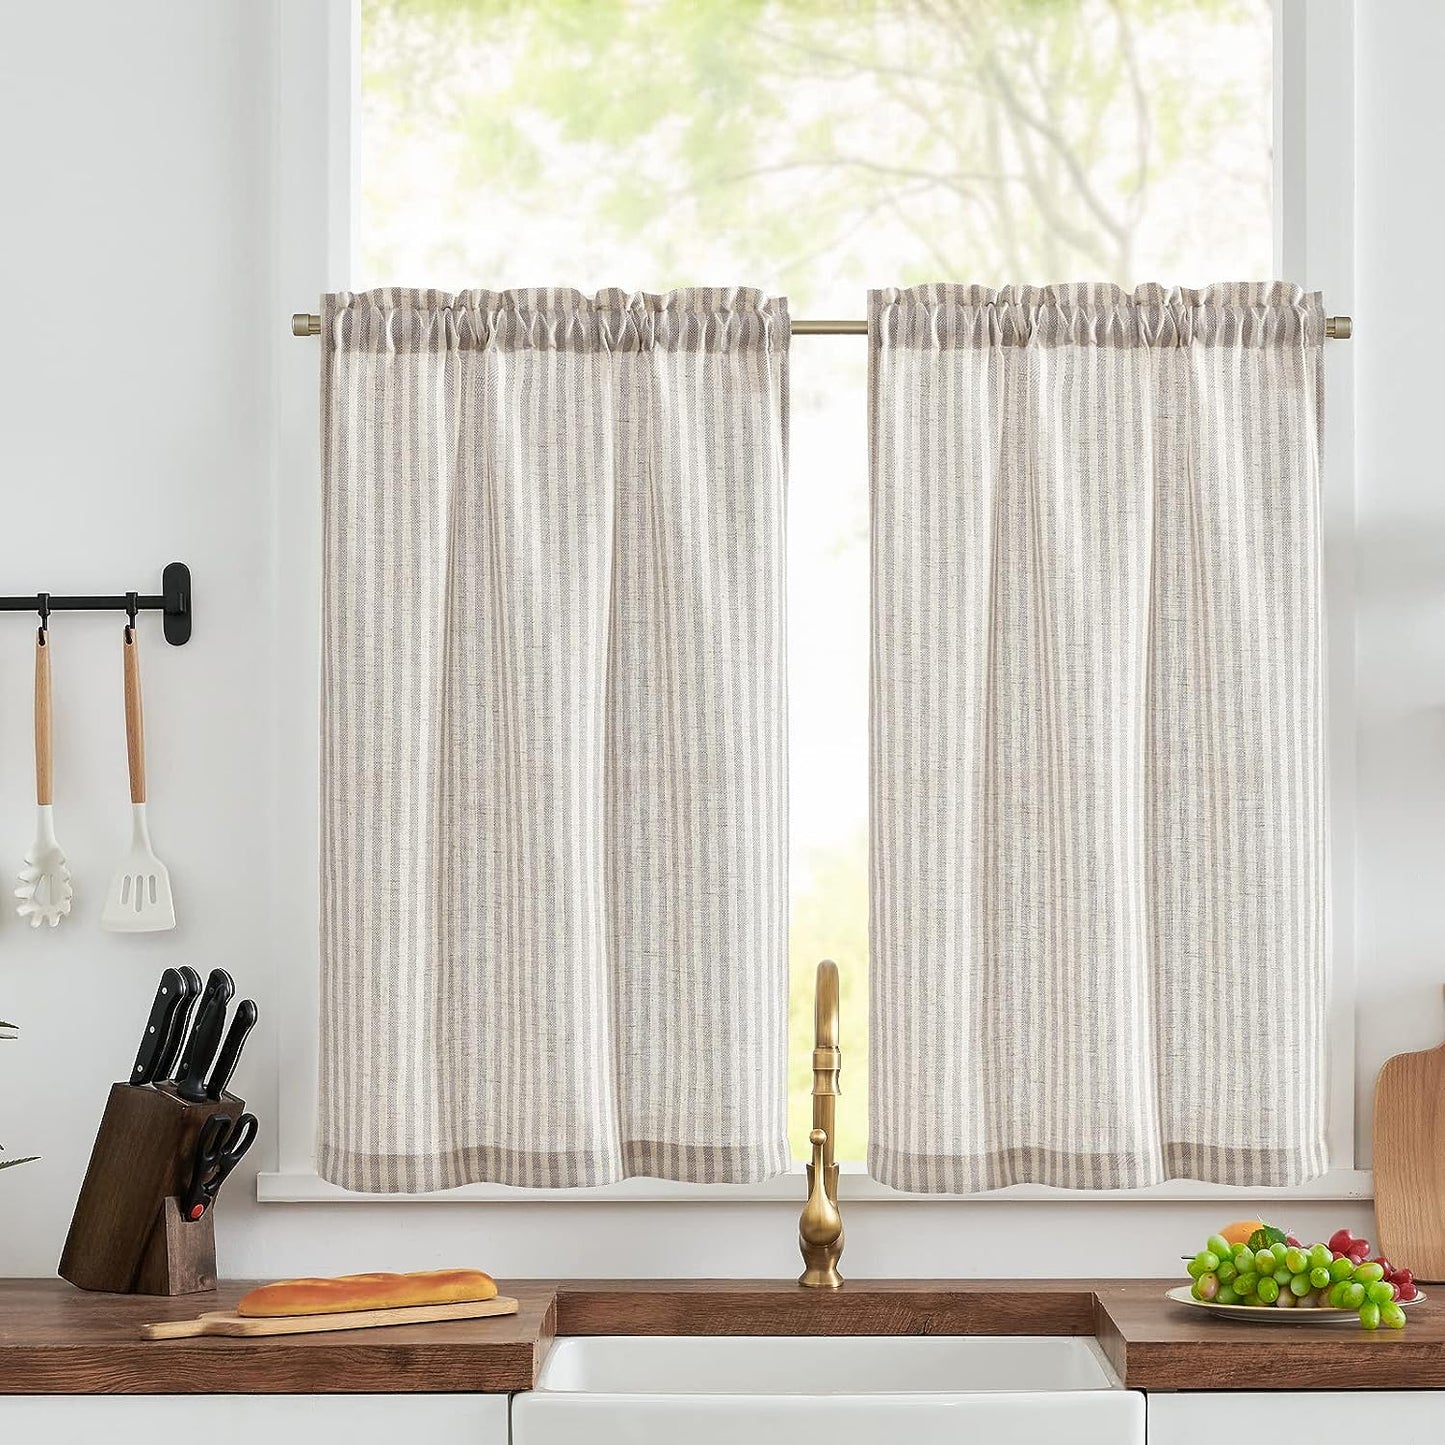 Jinchan Kitchen Curtains Striped Tier Curtains Ticking Stripe Linen Curtains Pinstripe Cafe Curtains 24 Inch Length for Living Room Bathroom Farmhouse Curtains Rod Pocket 2 Panels Black on Beige  CKNY HOME FASHION Rod Pocket Striped Taupe W26 X L45 